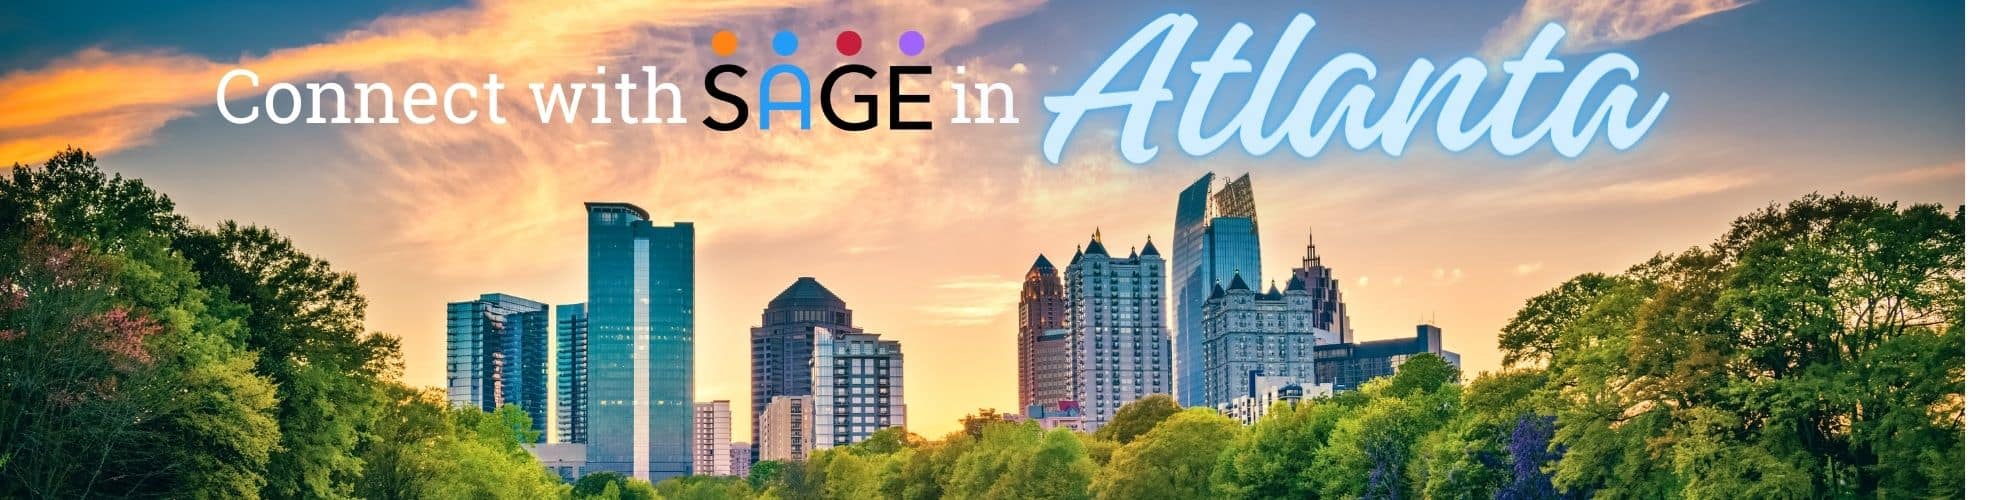 2024 Environments for Aging Conference + Expo SAGE